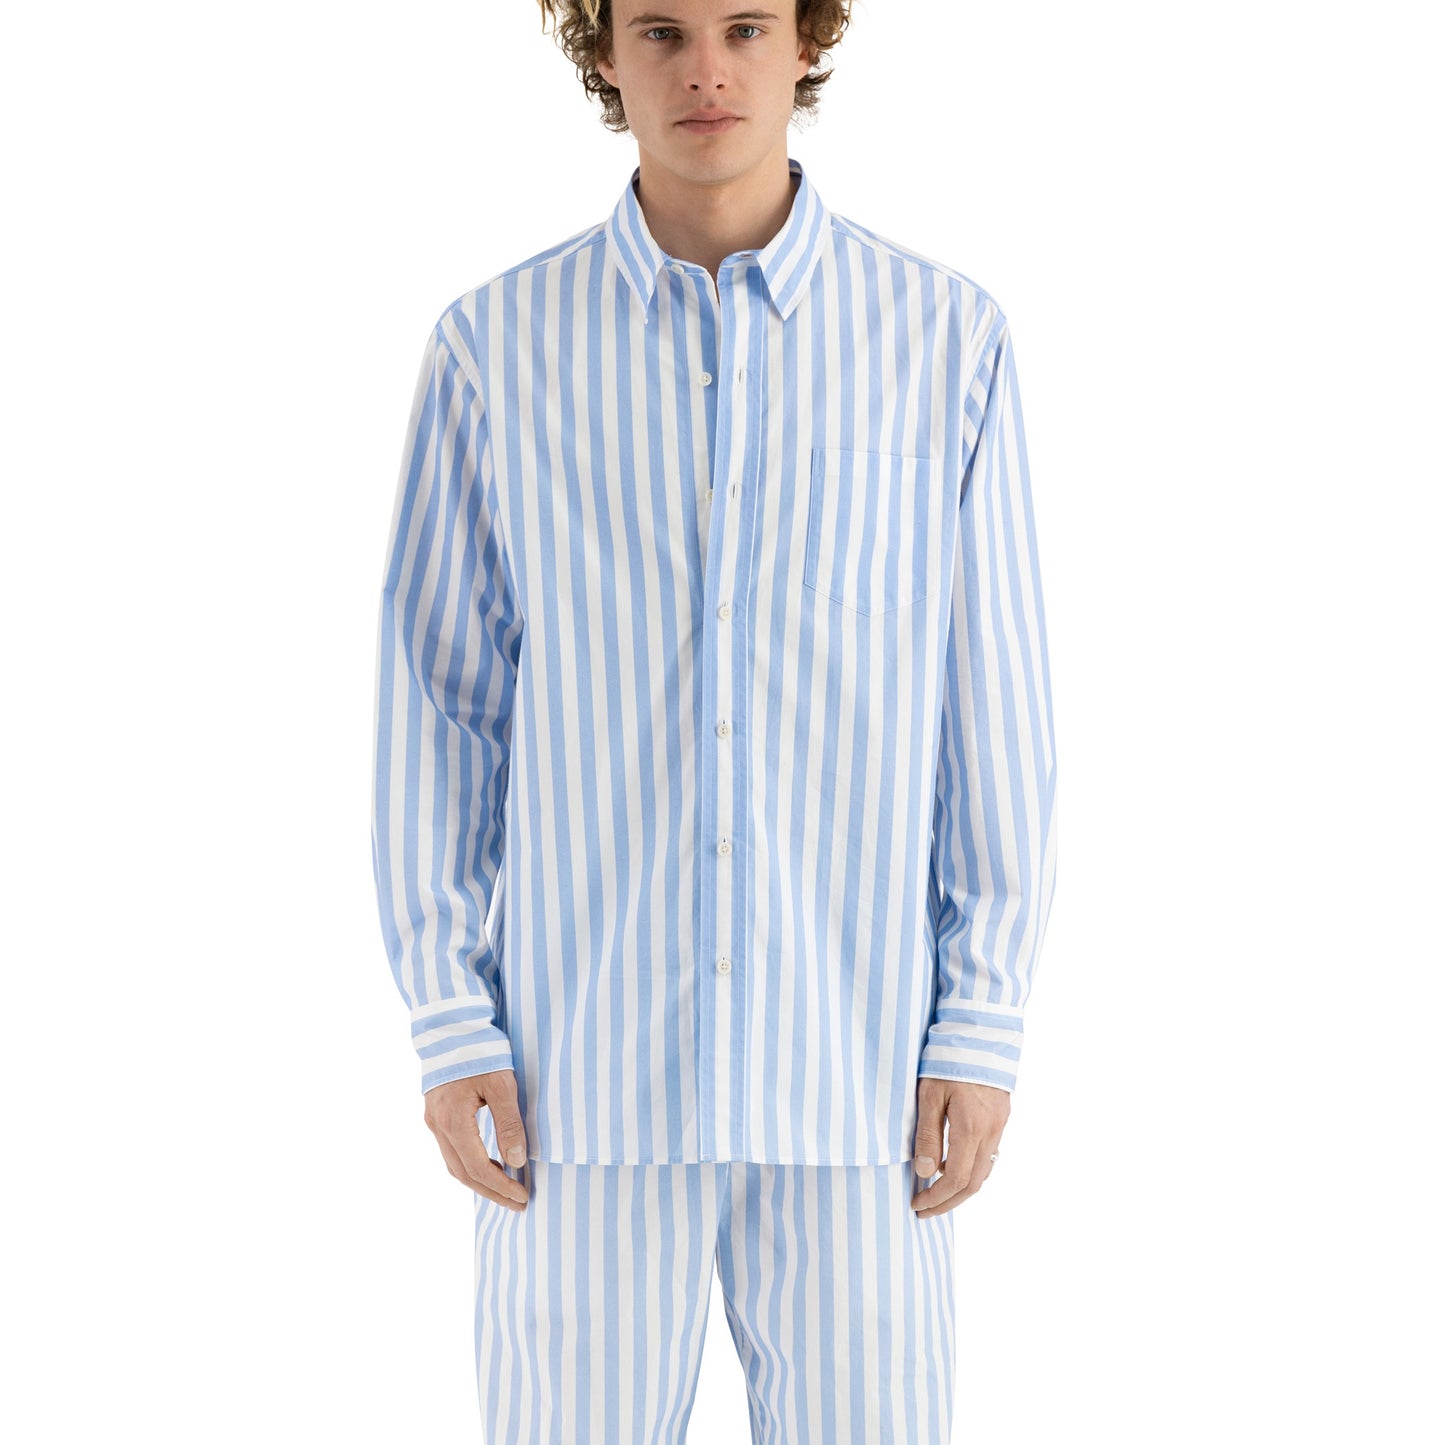 Pablo Exaggerated Unlined Shirt Light Blue Stripe